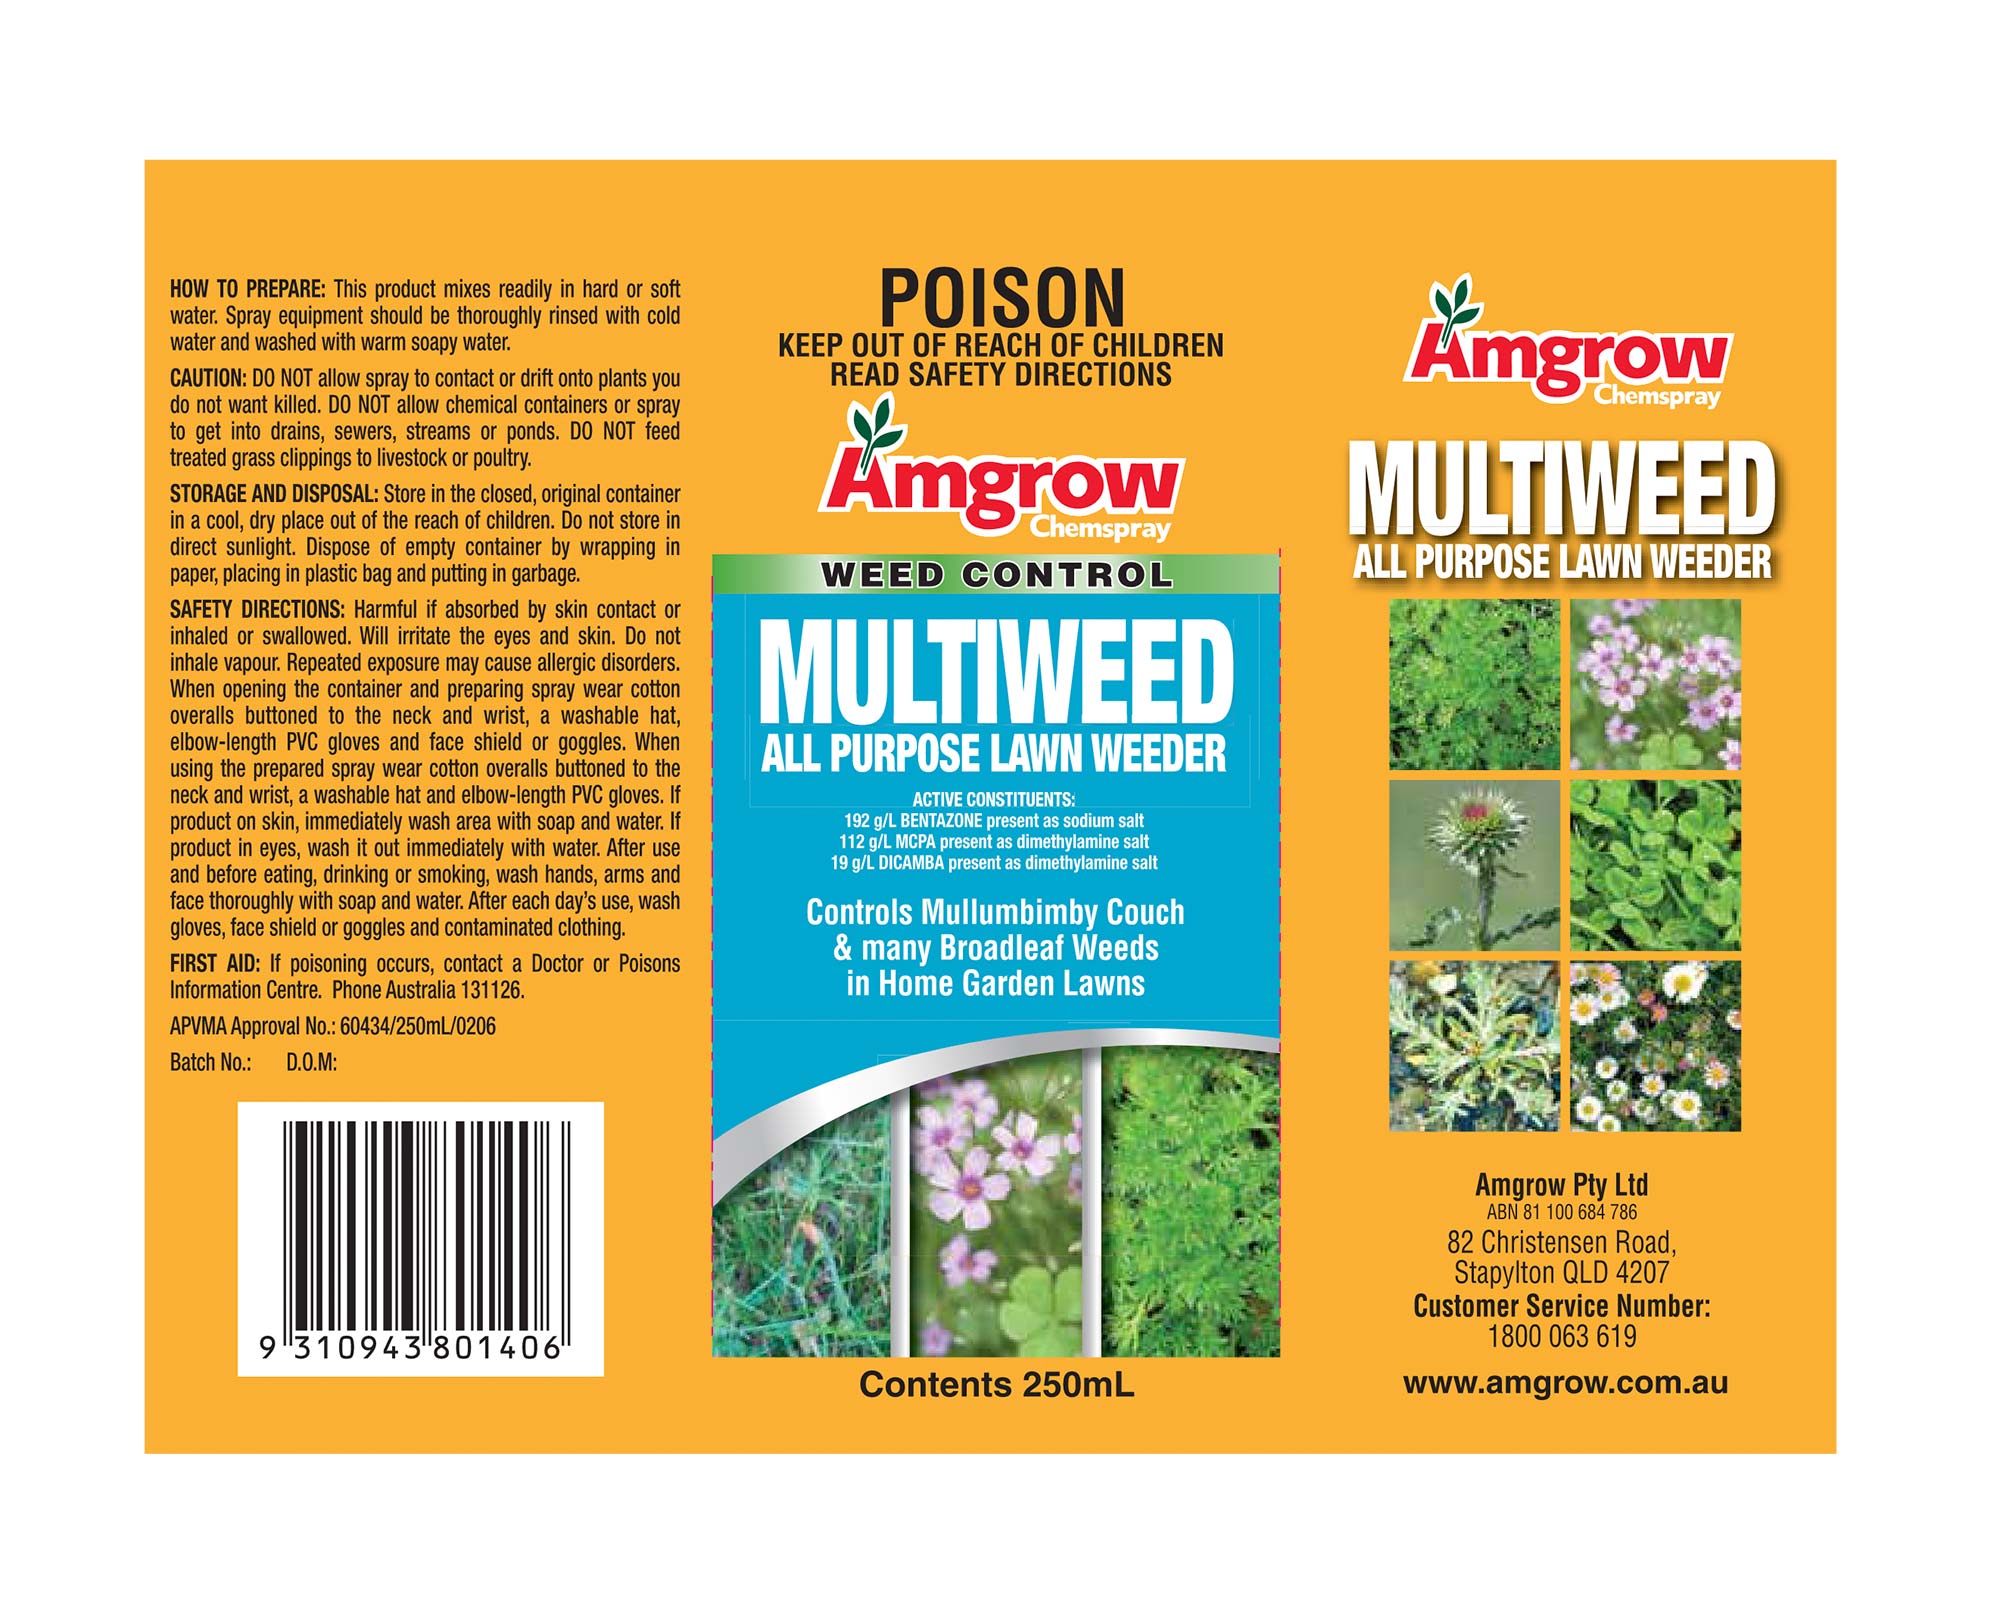 Multiweed All Purpose Lawn Weeder 250ml bottle Amgrow Label